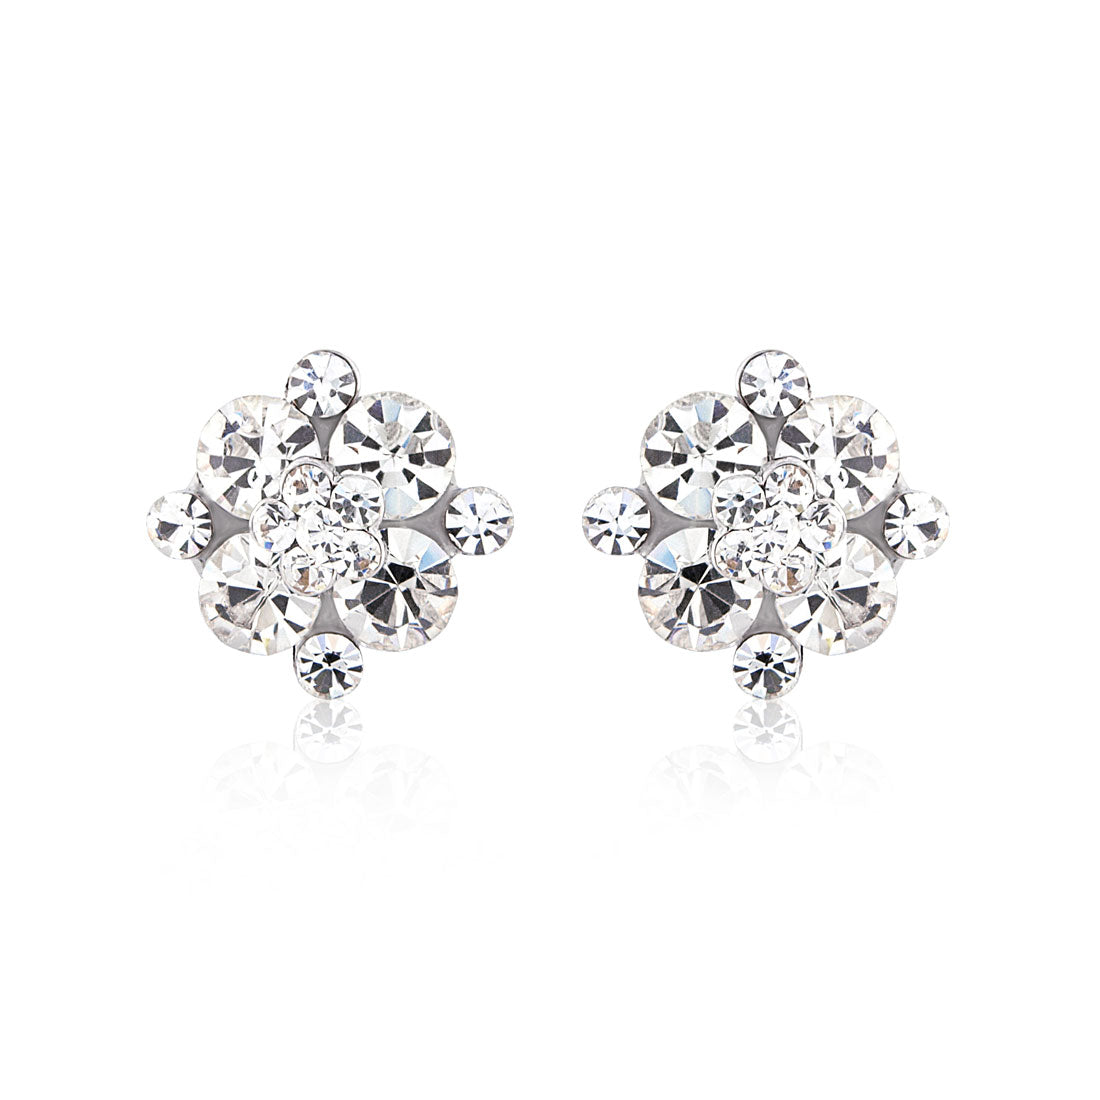 Starlet of Class Crystal Cluster Stud Wedding Earrings for Brides & Bridesmaids